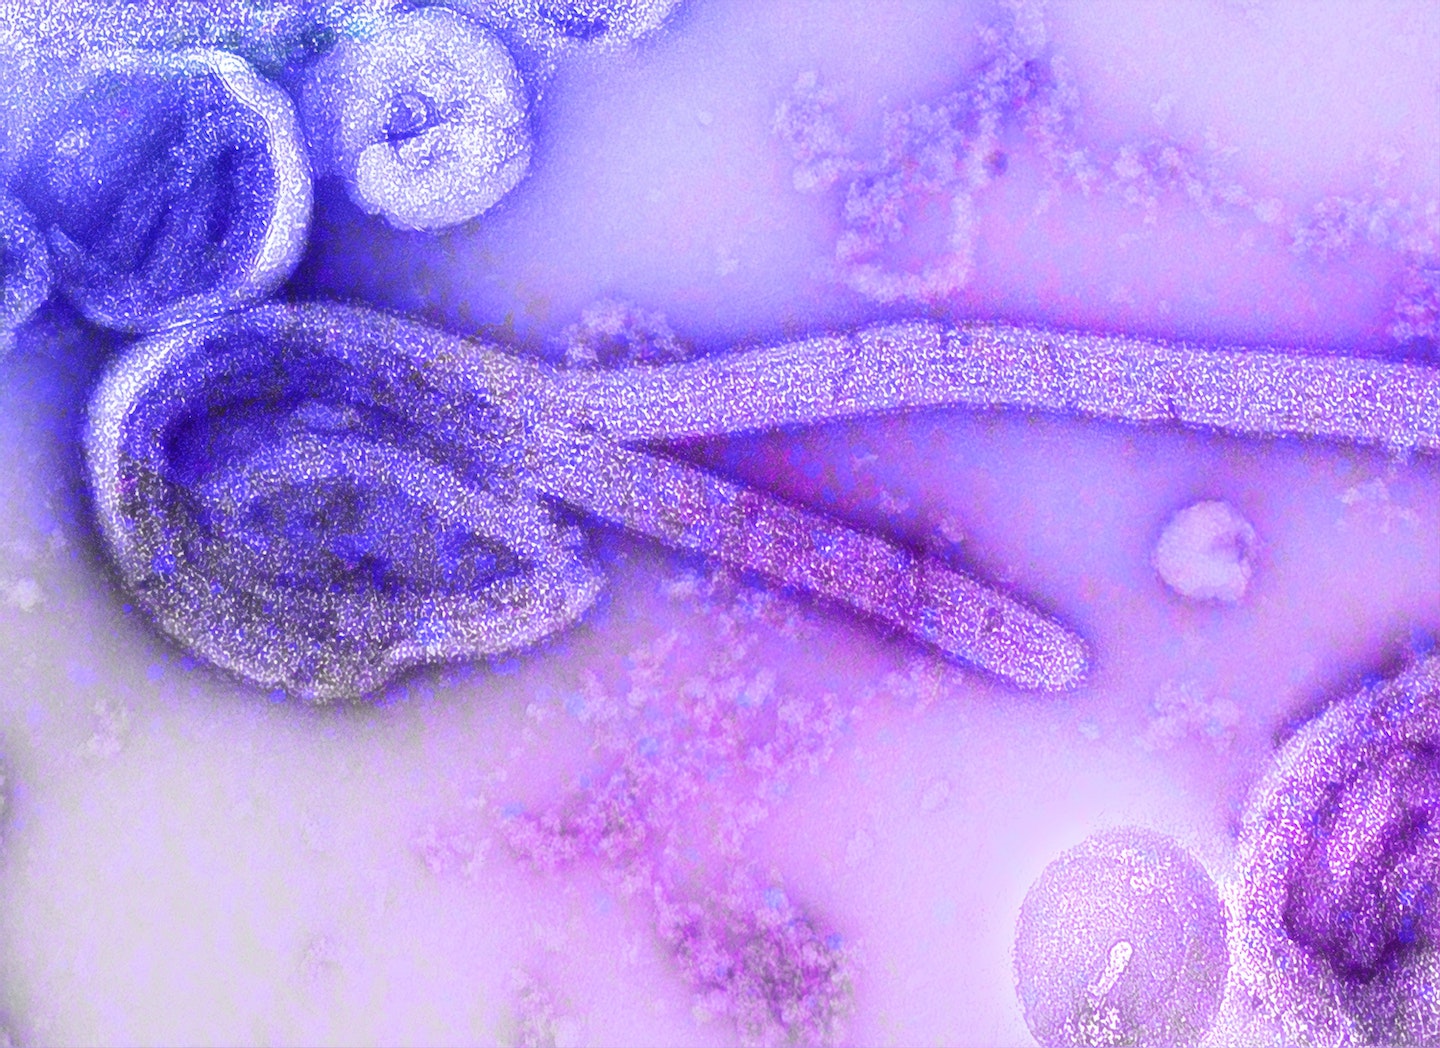 A microscopic image, in purple and pink, of an ebola virus